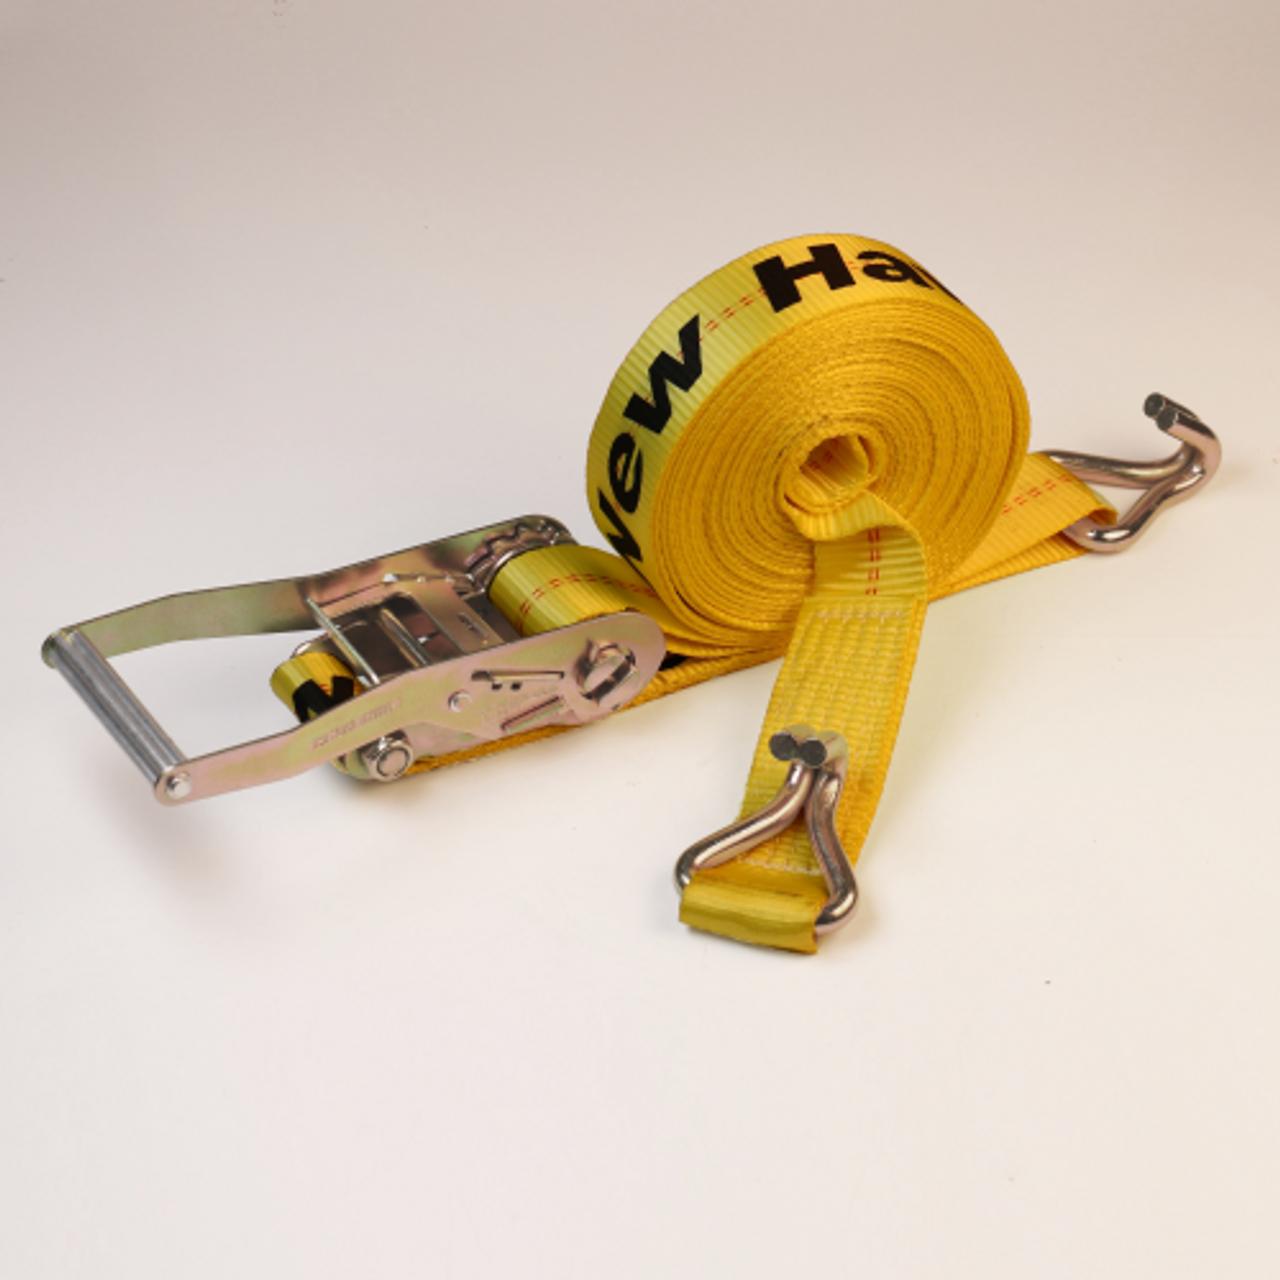 New Haven's Flatbed tiedown M10 ratchet strap, 2" x 30' with wire formed hooks. Working load limit 3,335 lbs. - Yellow